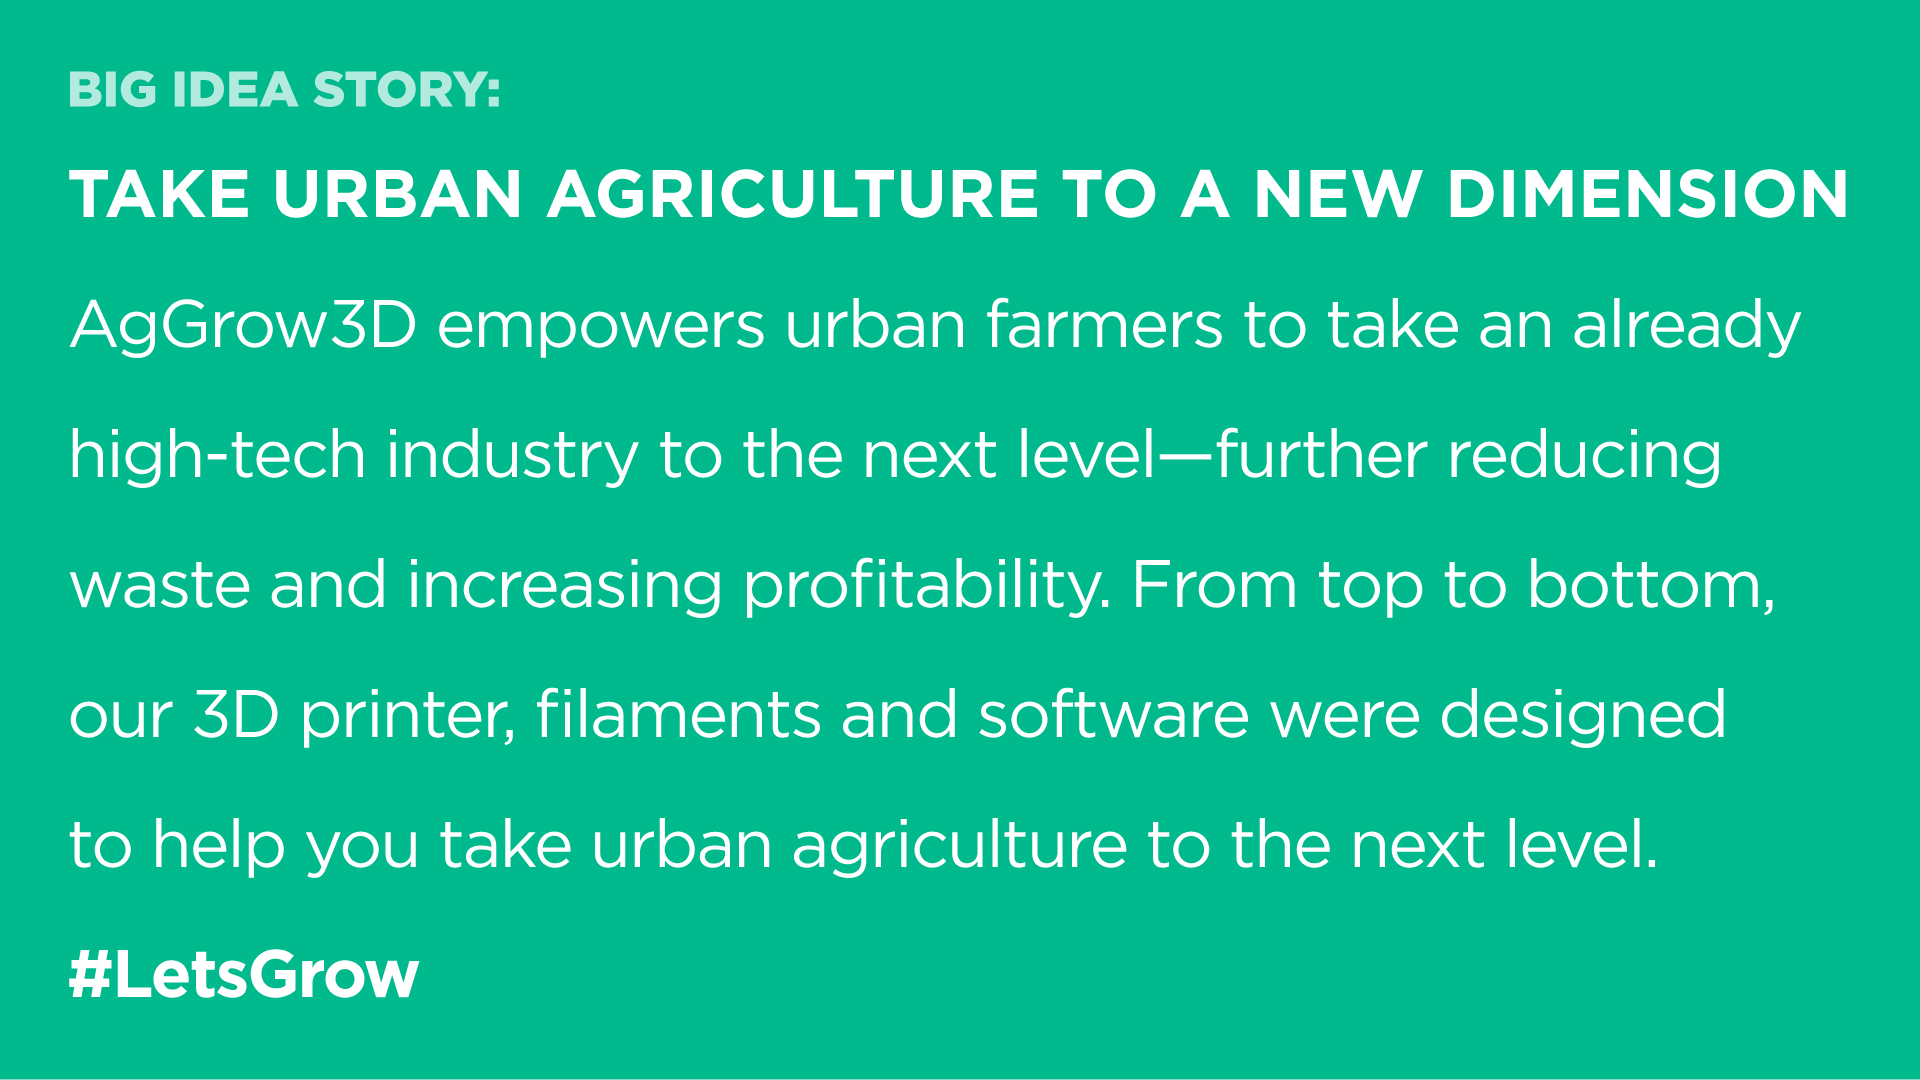 Take urban agriculture to a new dimension AgGrow3D empowers urban farmers to take an already high-tech industry to the next level—further reducing waste and increasing profitability. From top to bottom, our 3D printer, filaments and software were designed to help you take urban agriculture to the next level. #LetsGrow